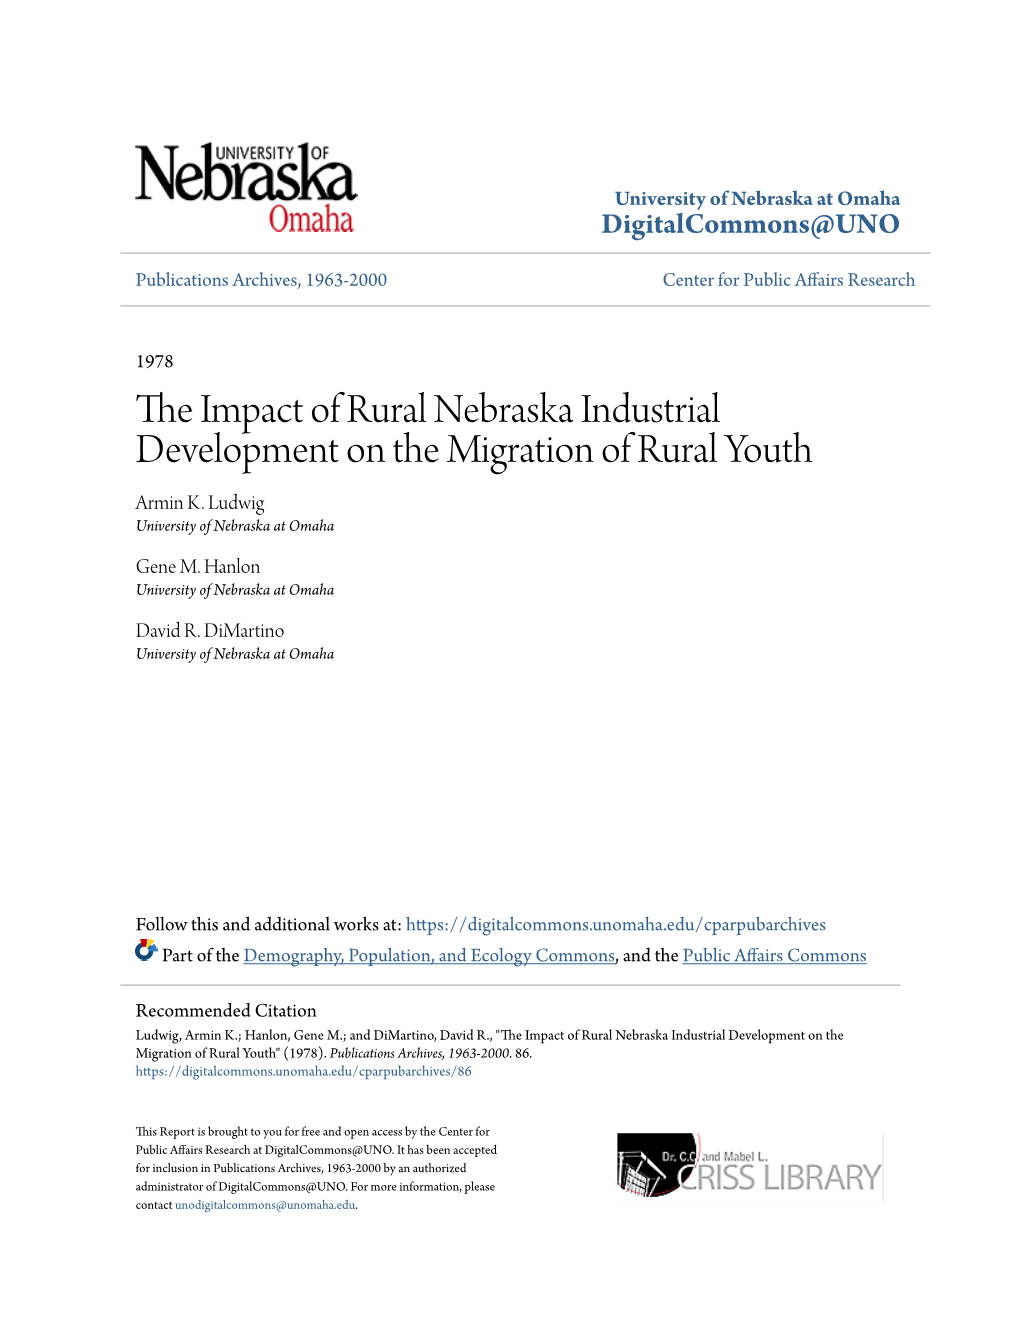 The Impact of Rural Nebraska Industrial Development on the Migration of Rural Youth